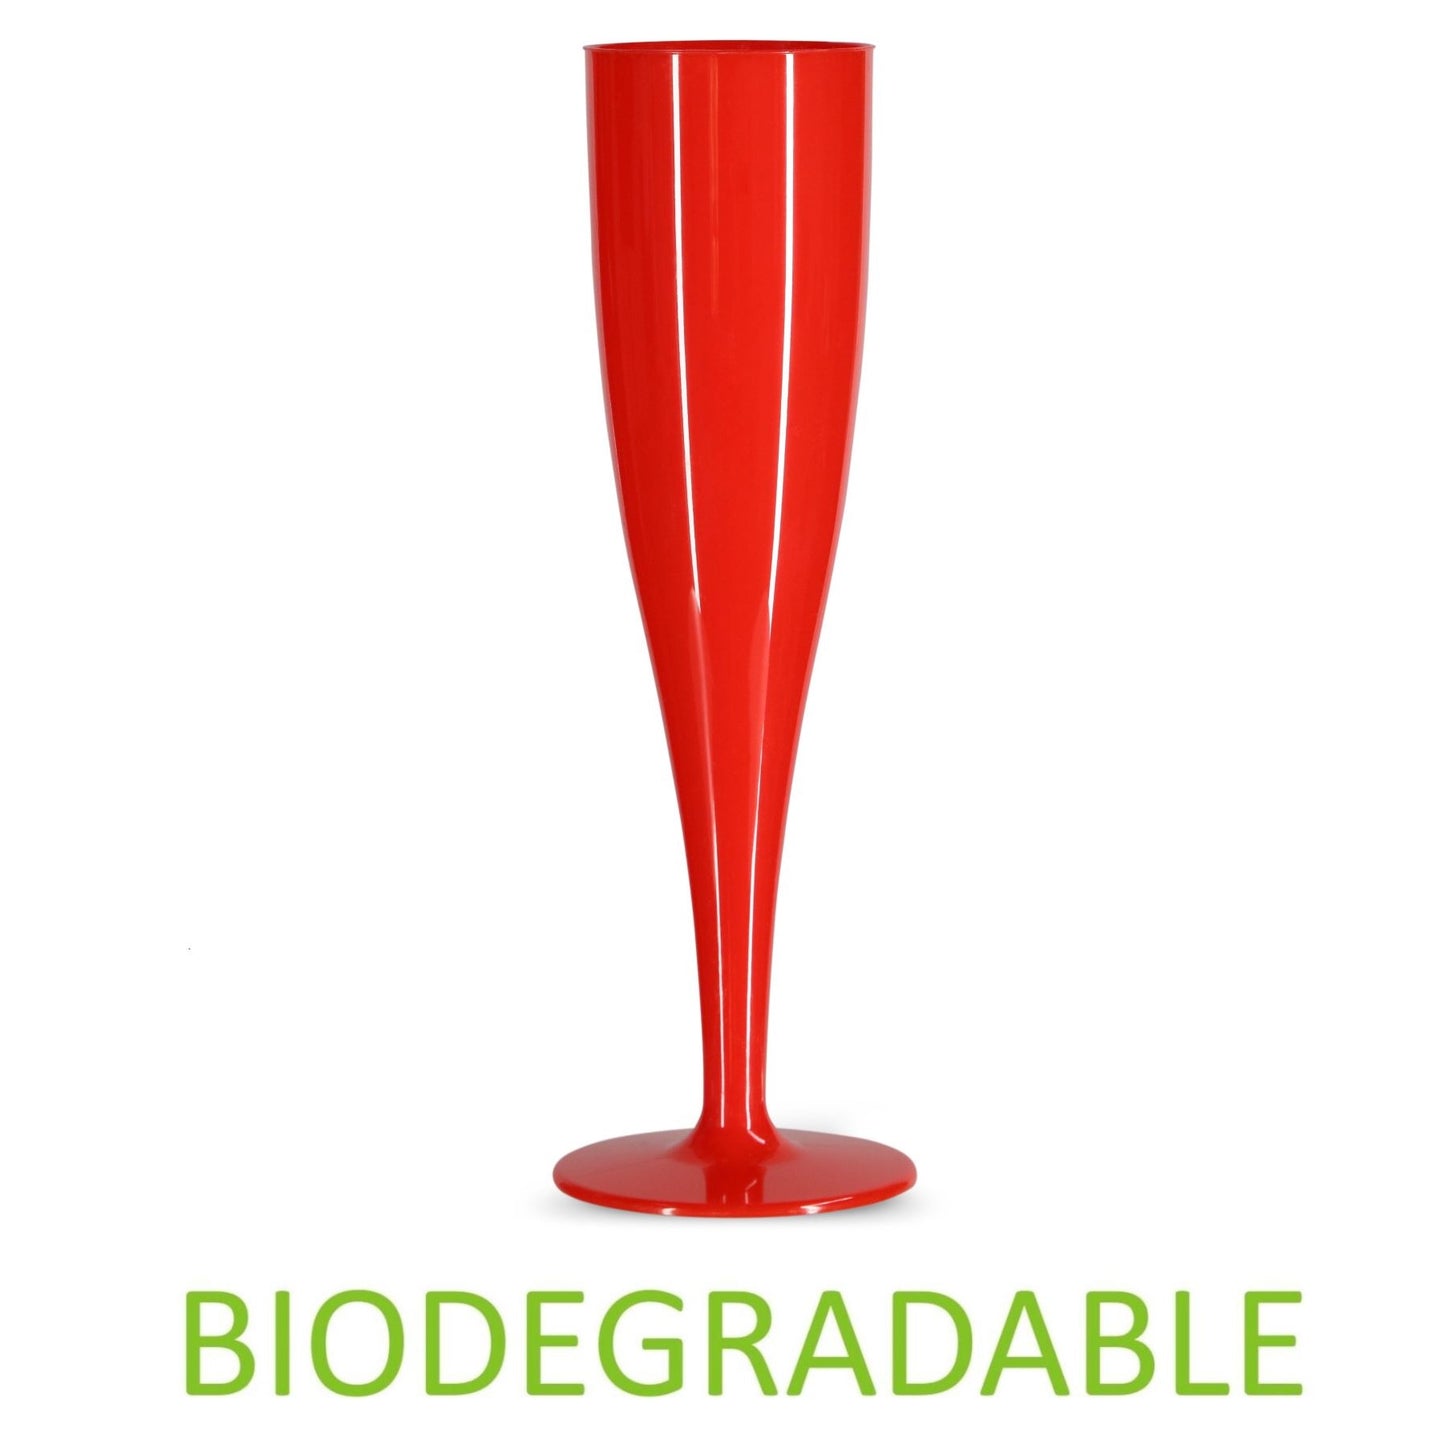 100 x Red Prosecco Flutes – Biodegradable Material in glossy Colour 1-Piece Champagne Glass (Pack of 100 Glasses) Halloween, Parties, BBQ-5056020187349-EY-PP-168-Product Pro-BBQ, Biodegradable, Champagne Flutes, Champagne Glasses, Flutes, Garden, Picnic, Prosecco Flutes, Prosecco Glasses, Red, Red Champagne Glasses, Red Prosecco Flutes, Wedding